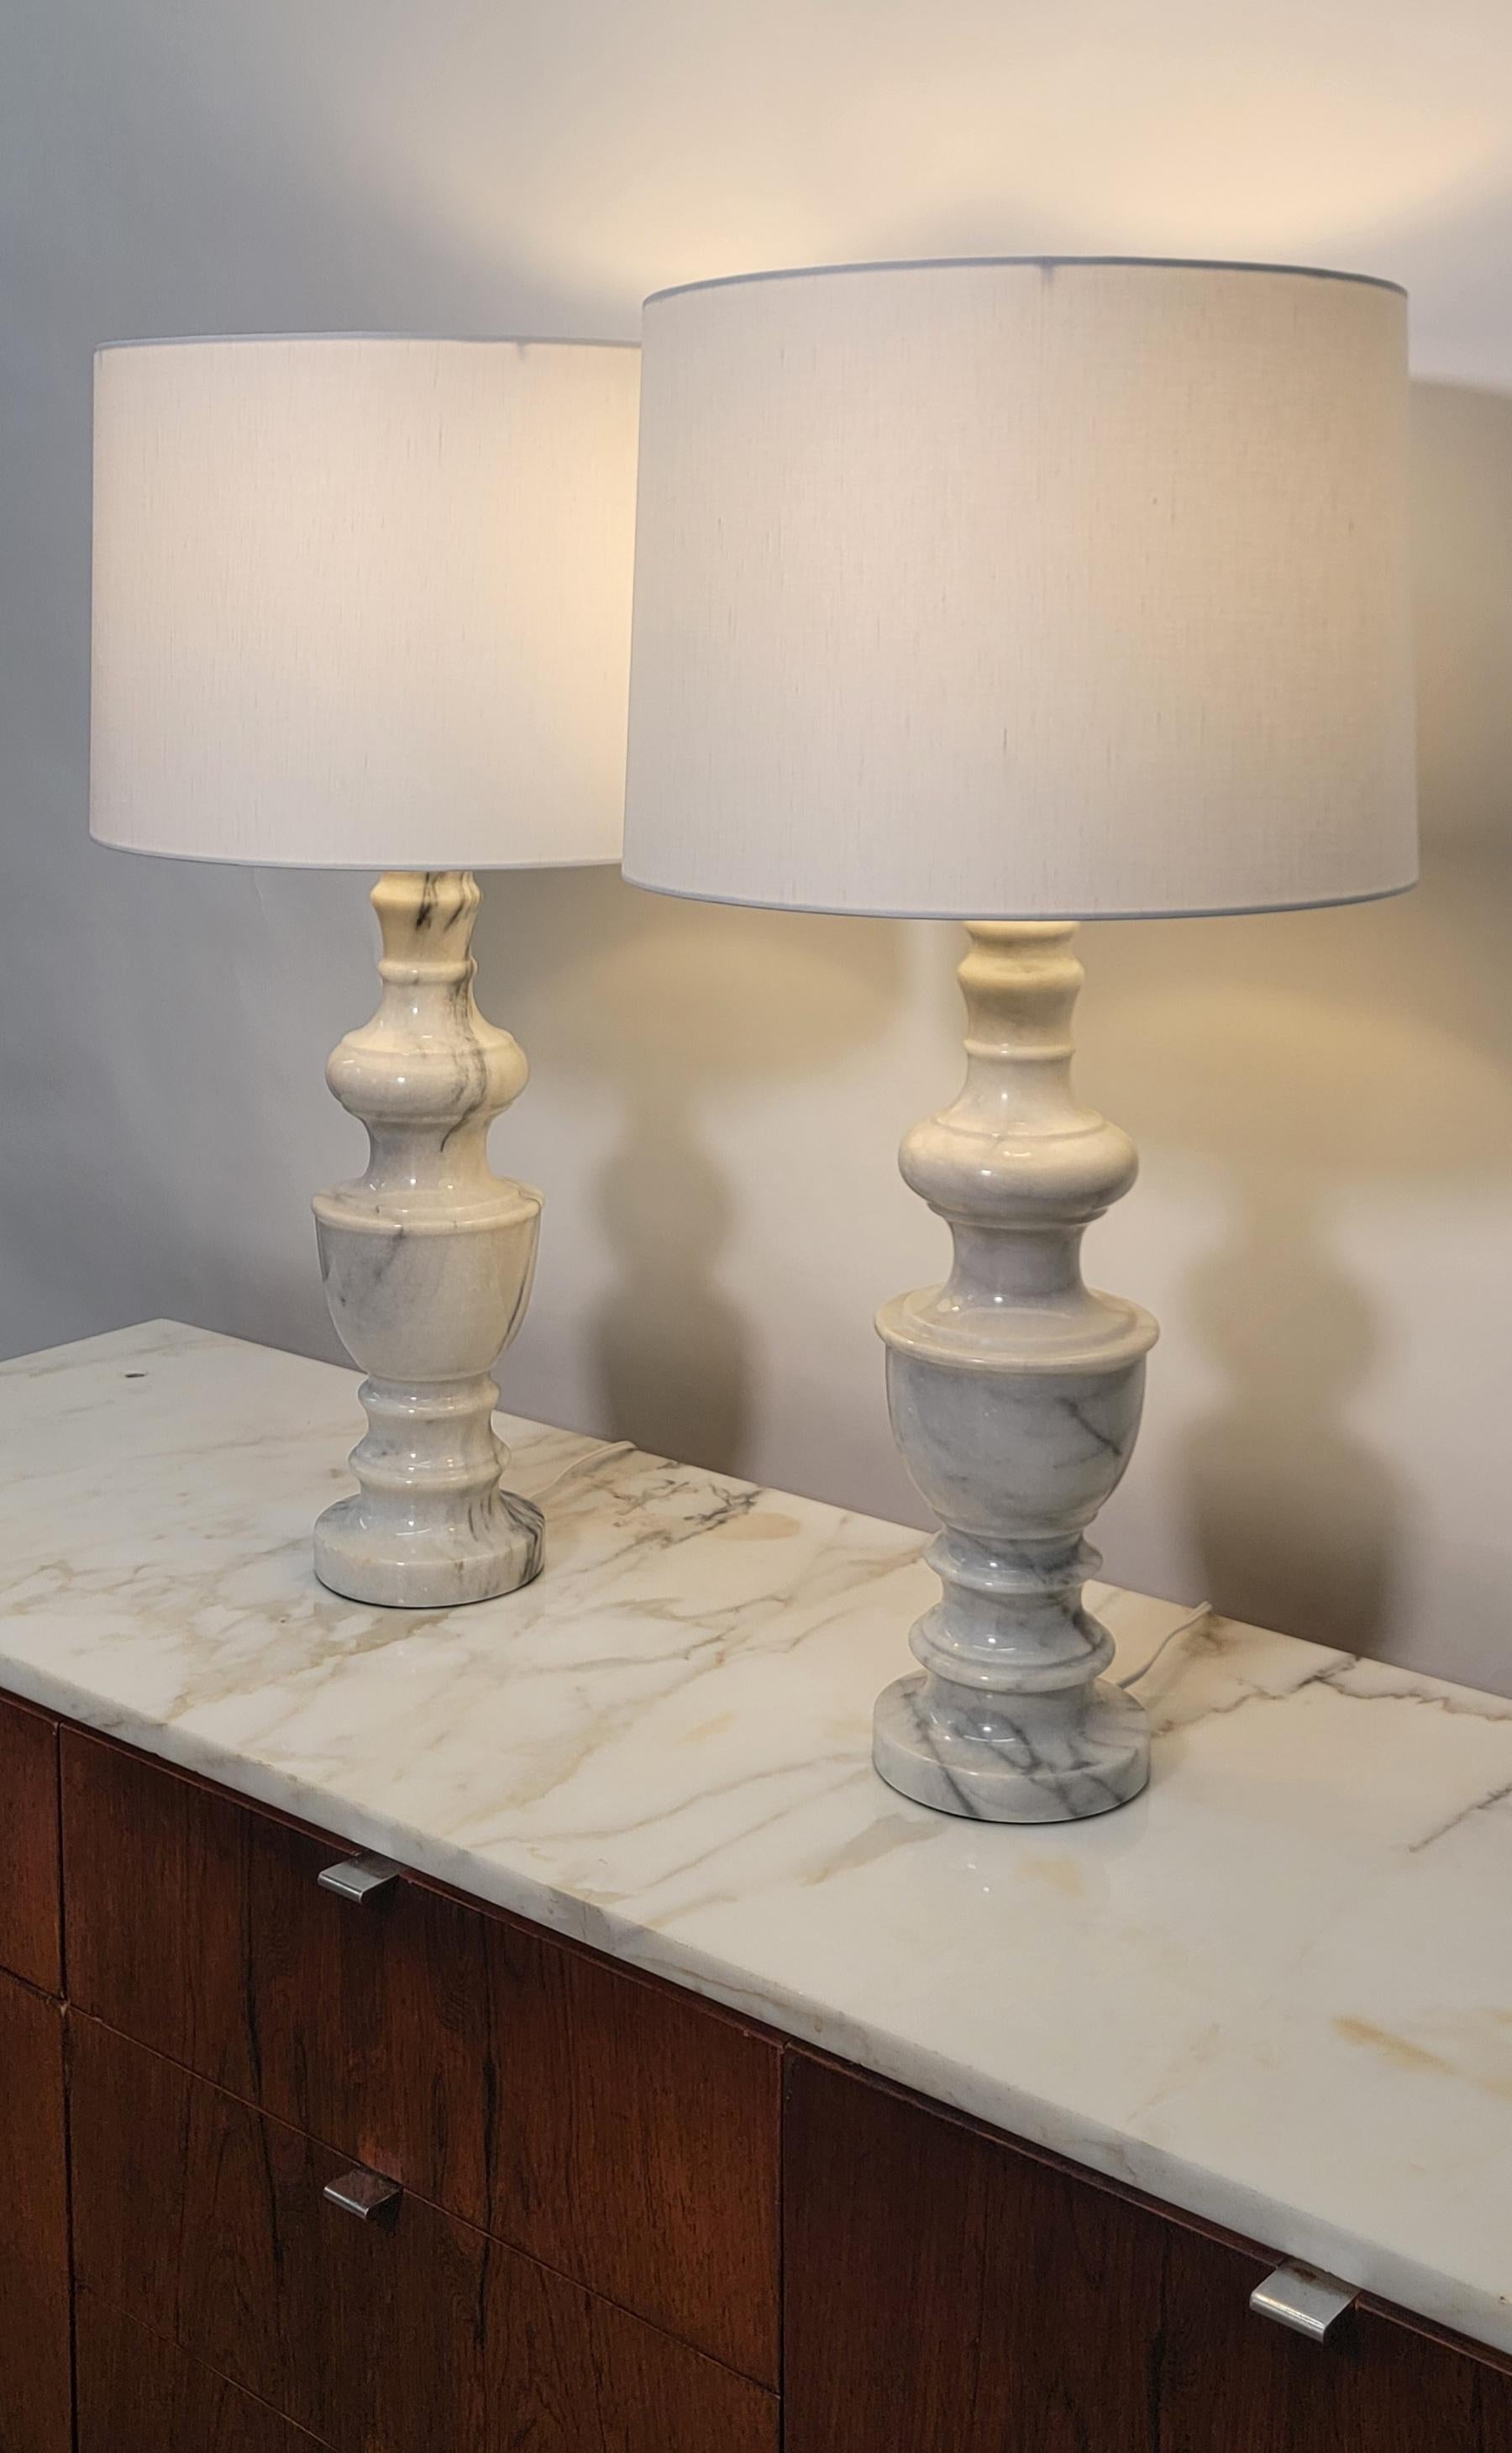 A beautiful and substantial pair of Italian white marble desk or table lamps in the Neoclassical style, circa 20th century, Italy. New white linen custom shades. Pair are predominantly white with some striking dark gray veining. A Classical urn lamp